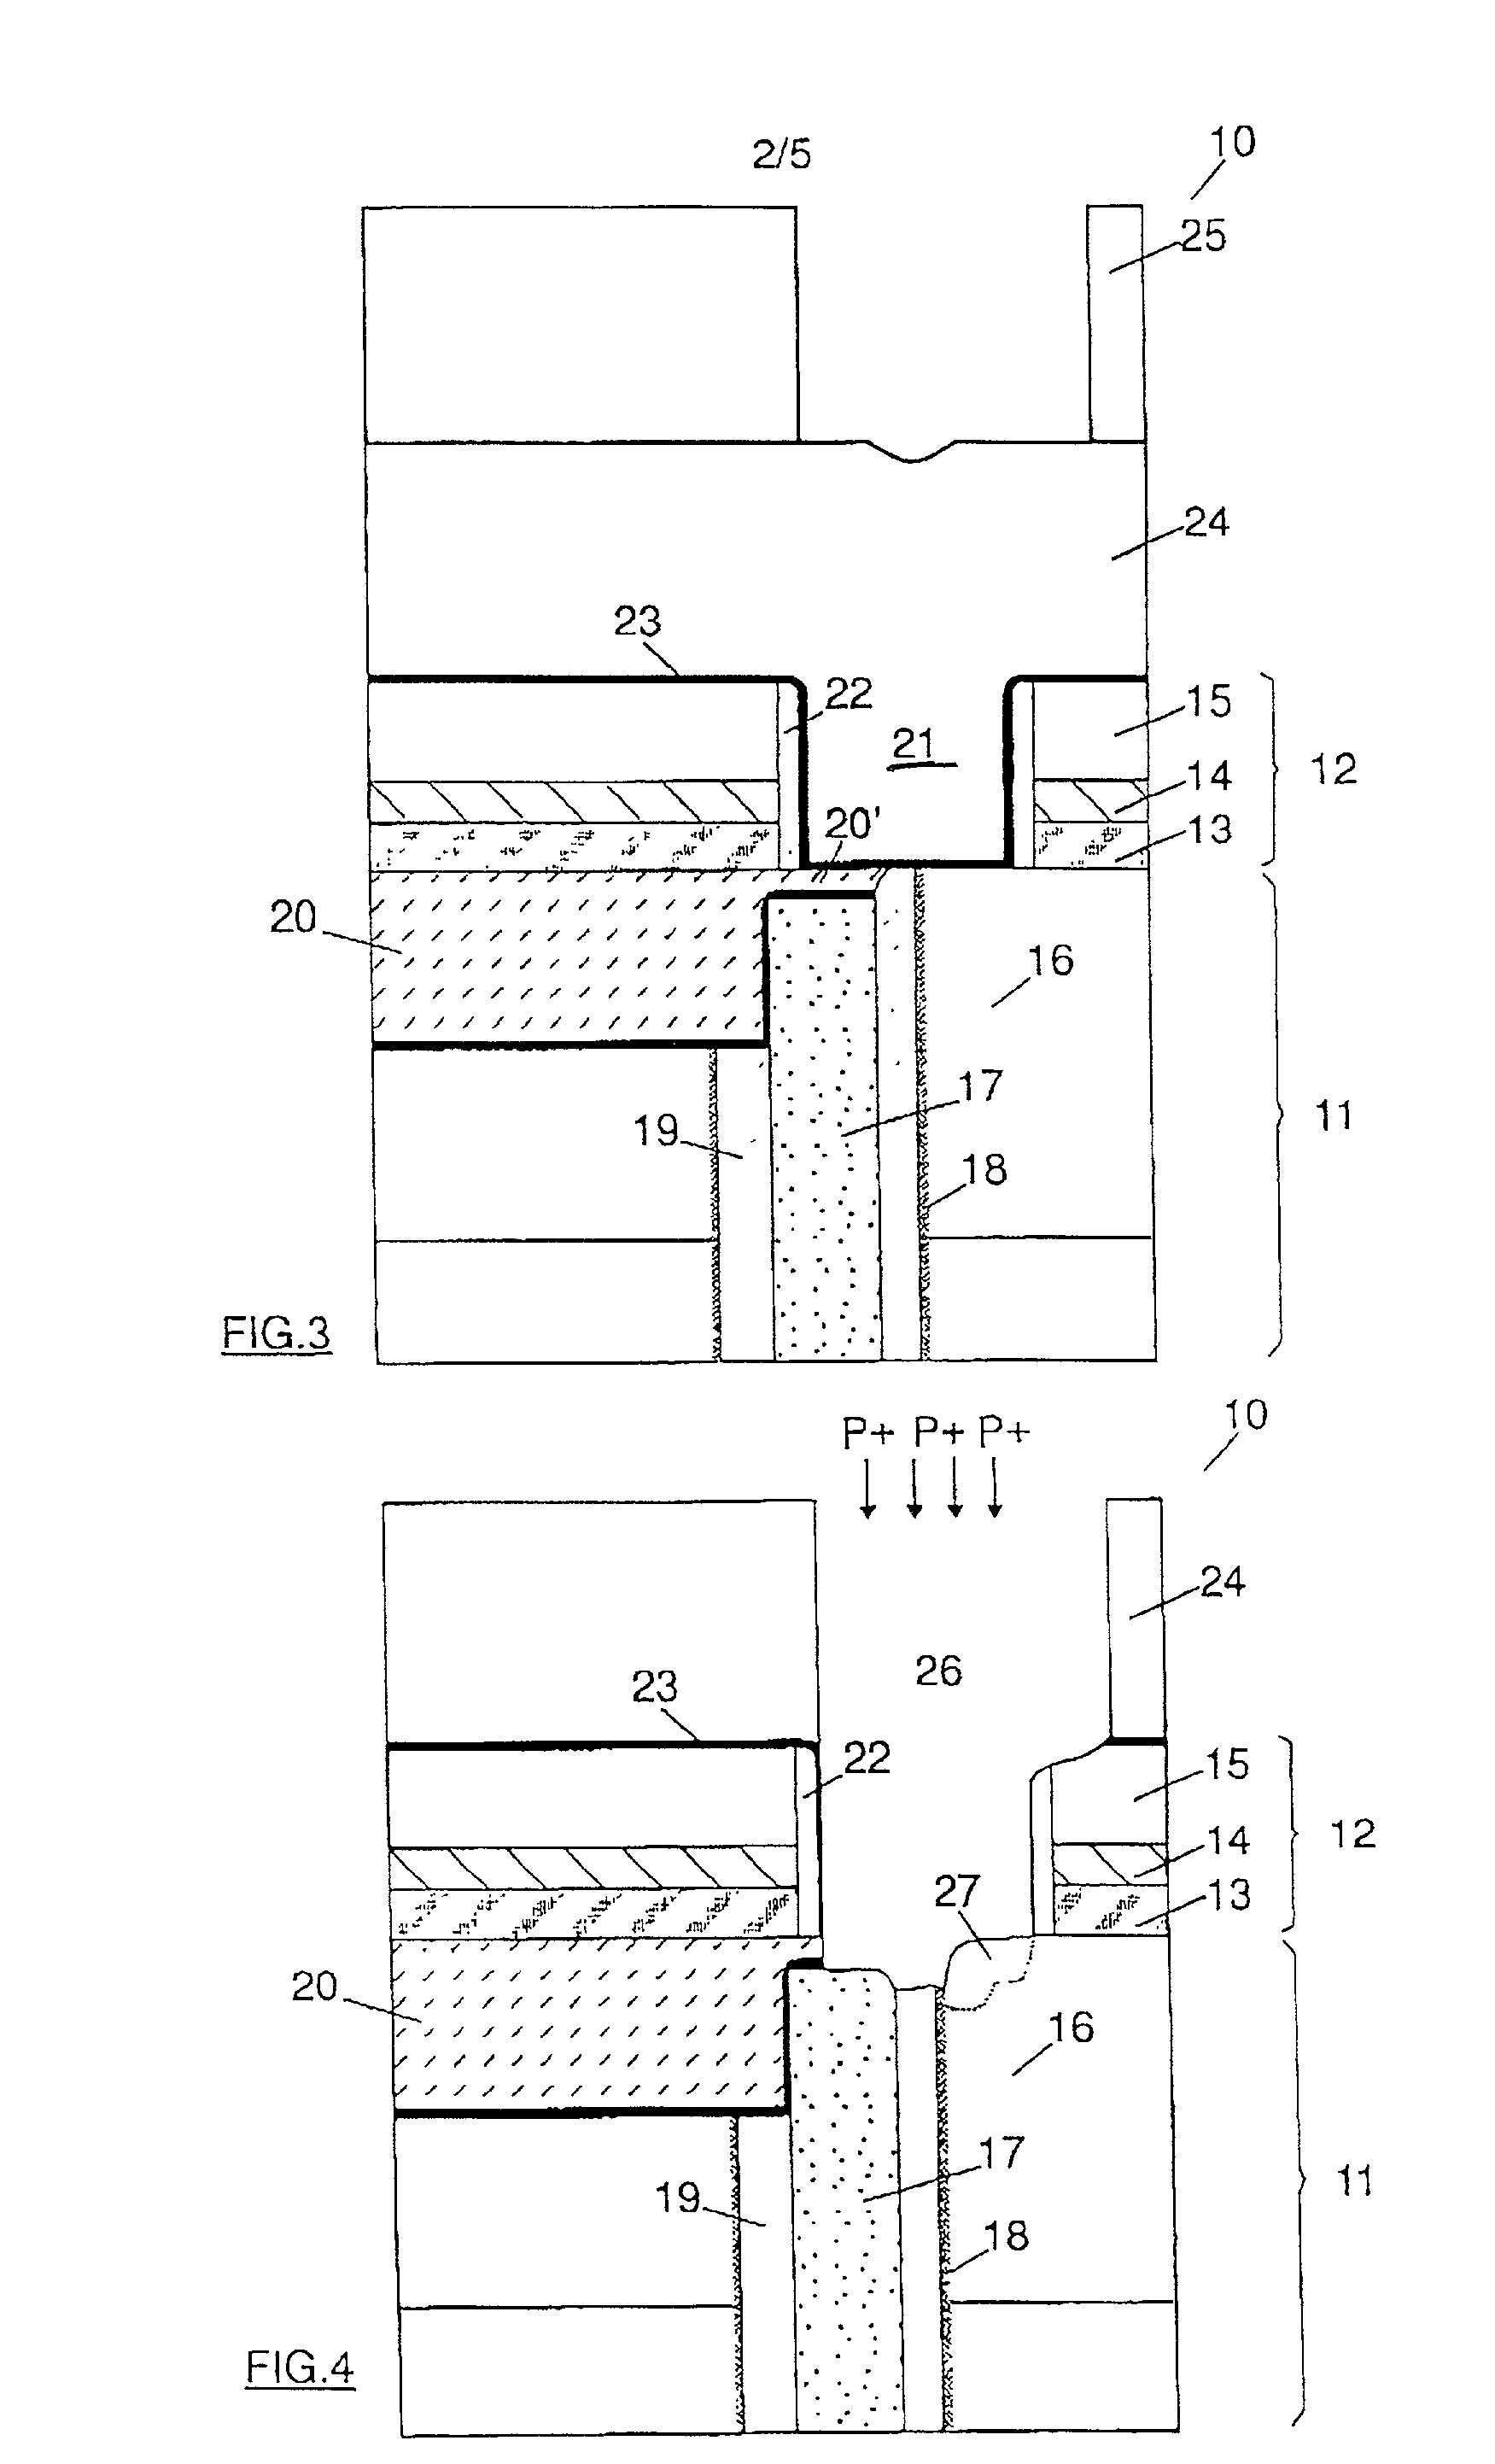 Method of plasma etching doped polysilicon layers with uniform etch rates